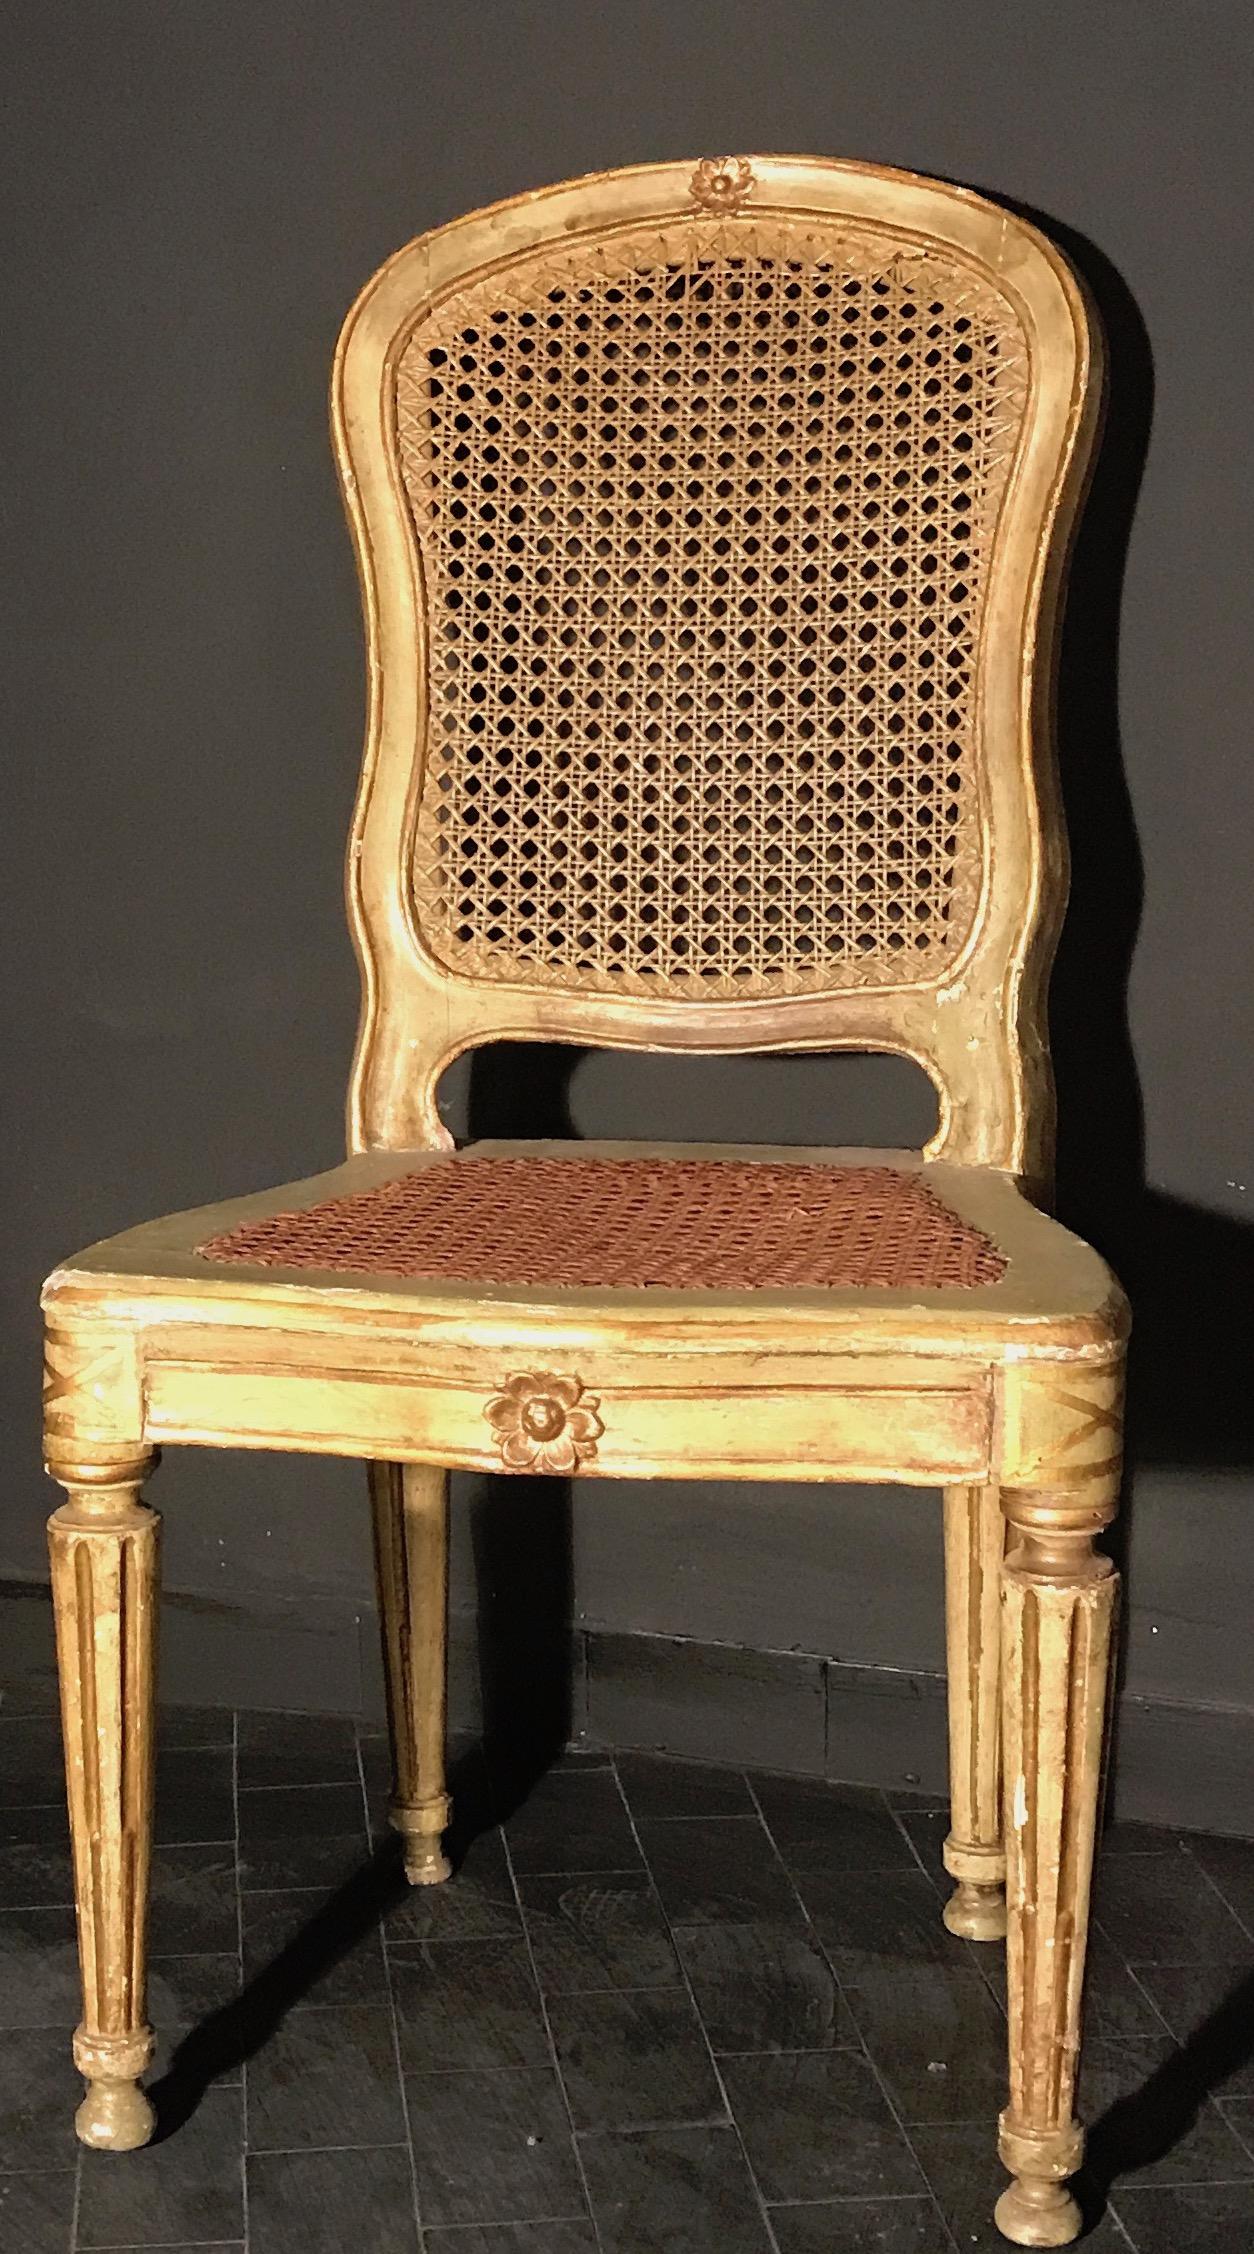 Louis XVI Fine Set of Six Italian, 18th Century Painted and Parcel-Gilt Chairs For Sale